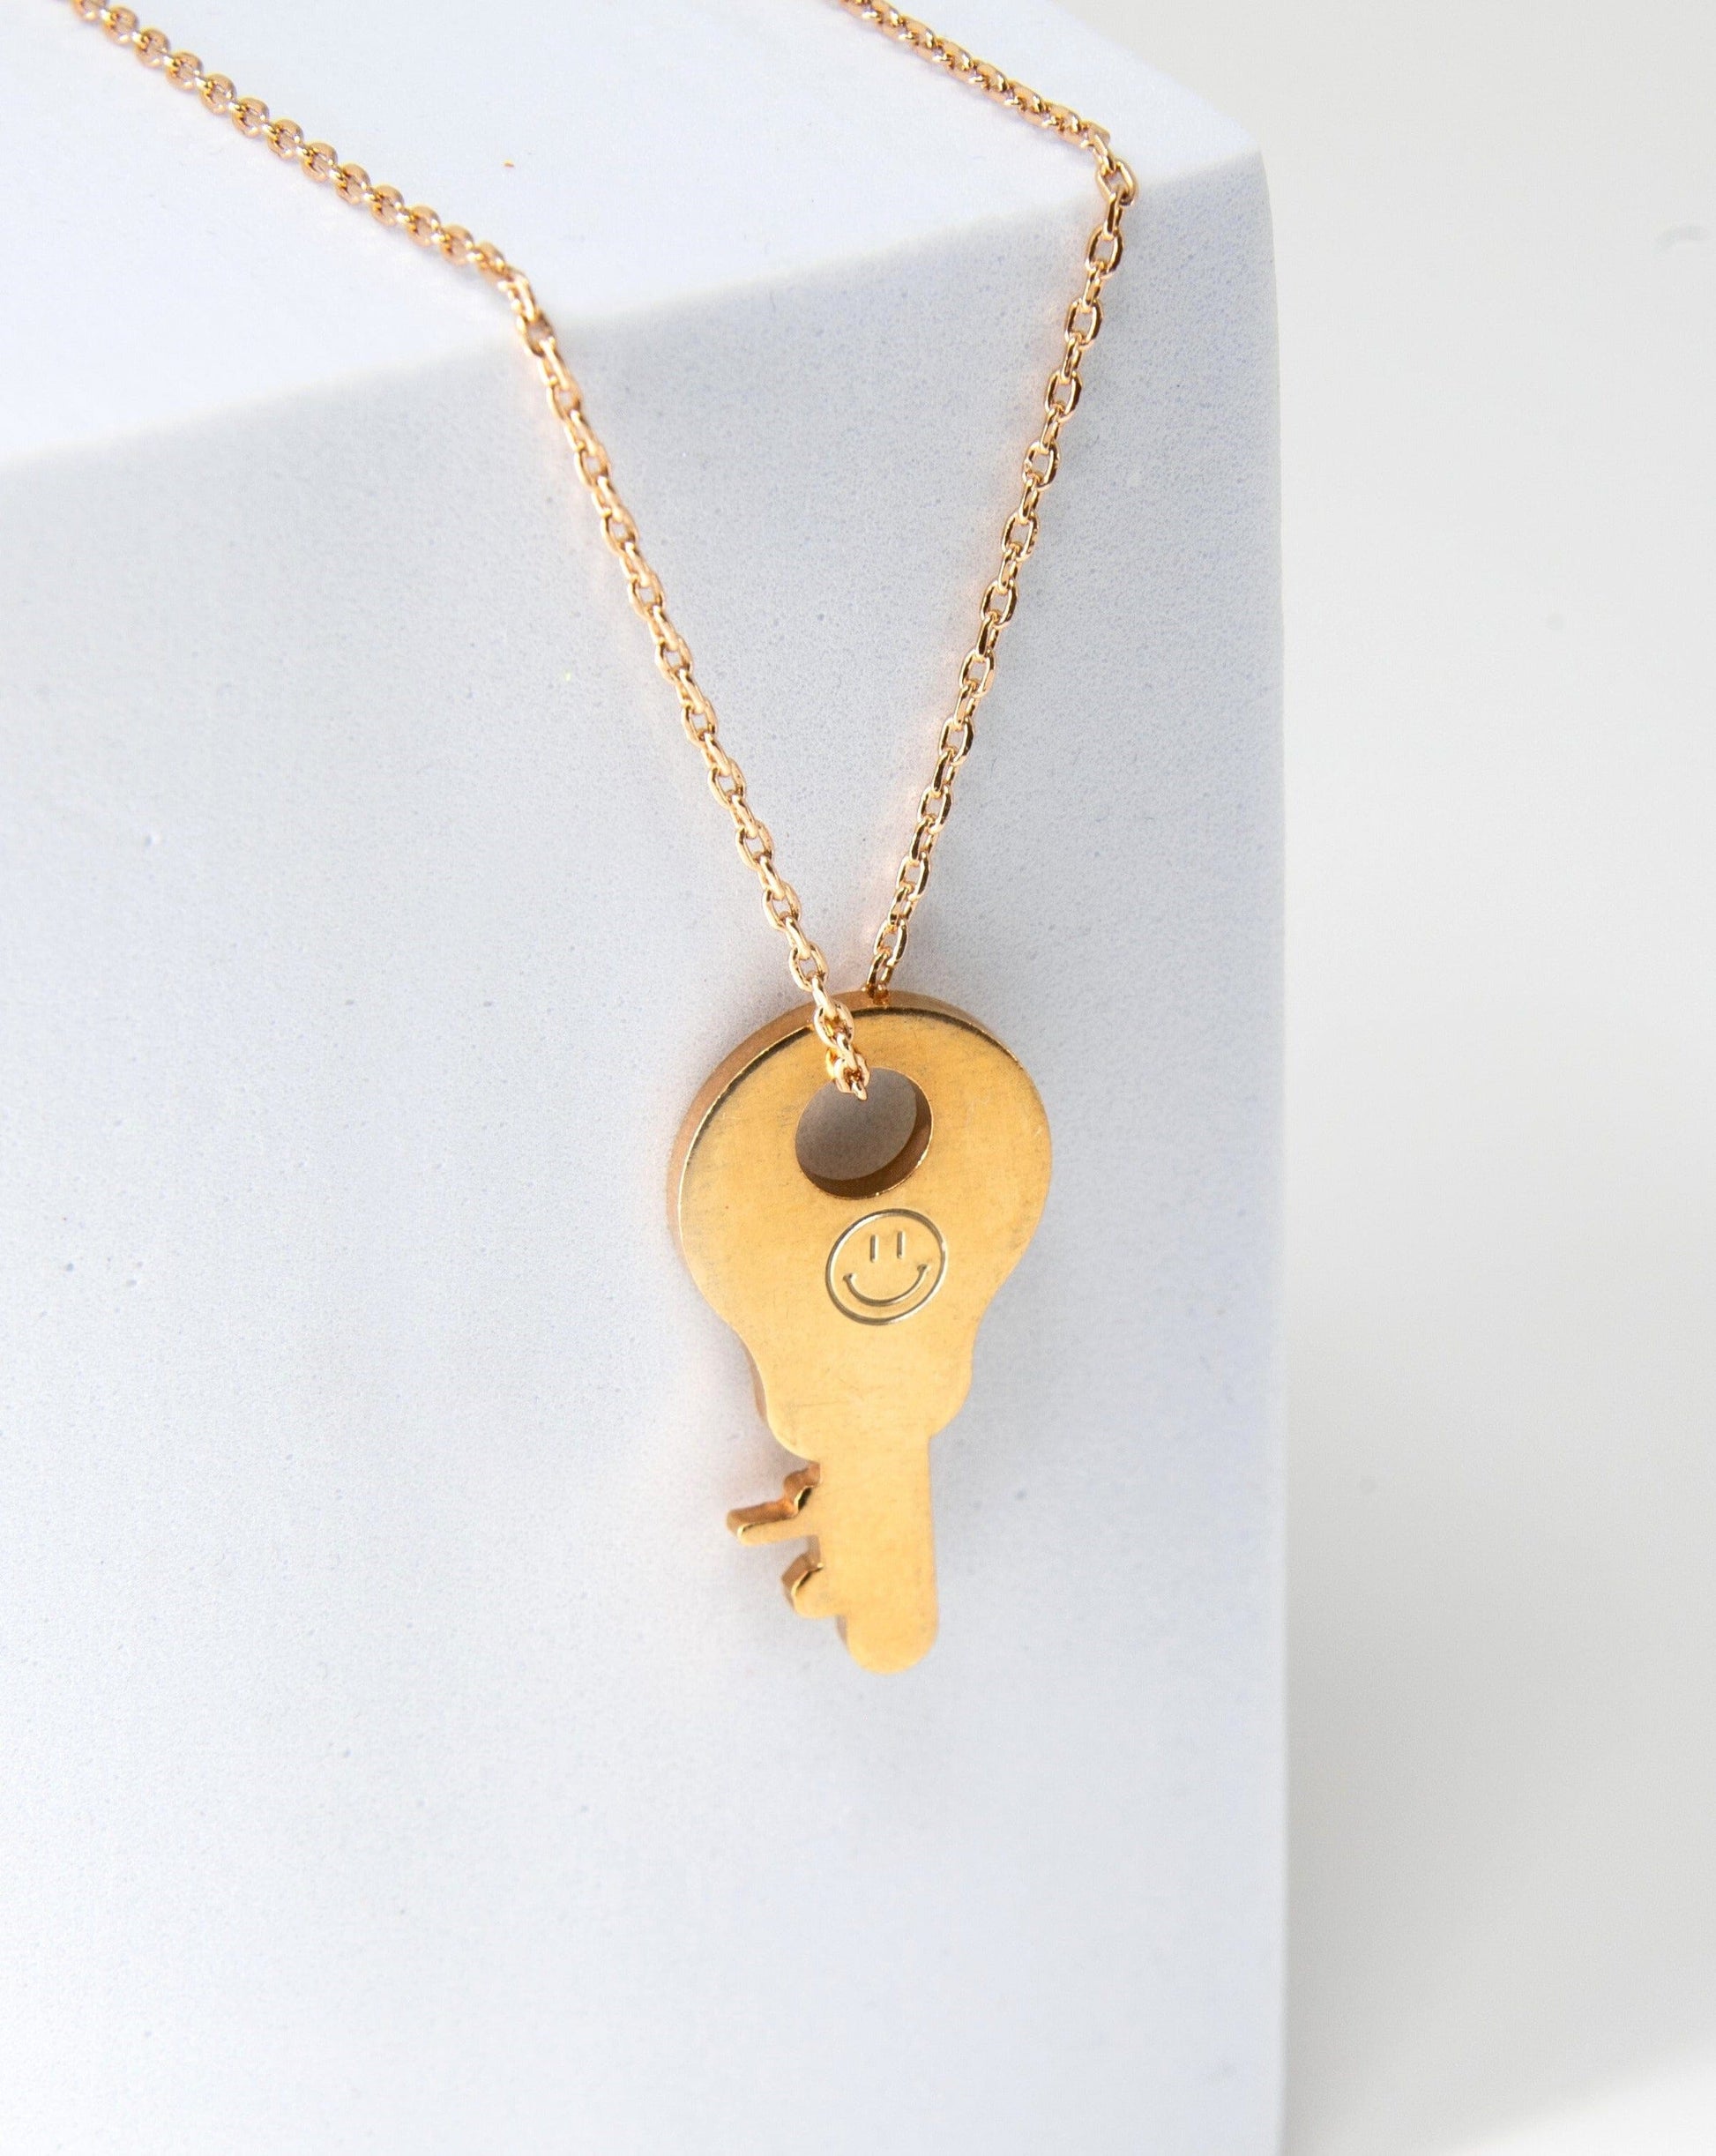 Symbol Dainty Key Necklace Necklaces The Giving Keys Dainty Gold 